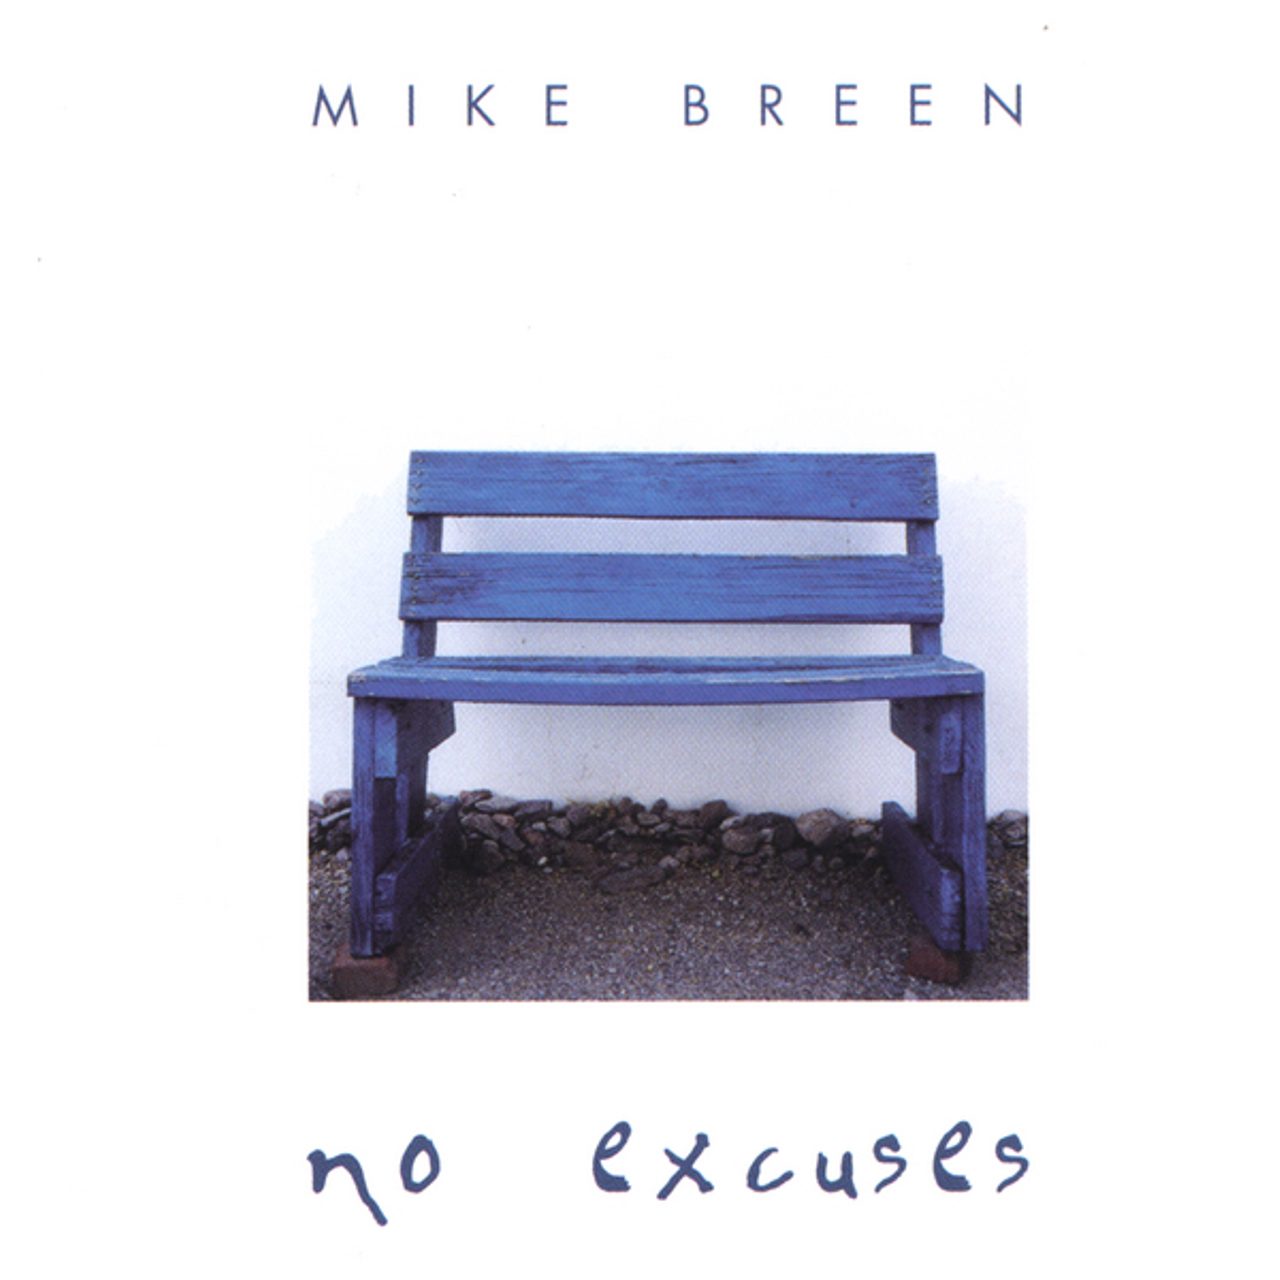 Mike Breen - No Excuses cover album